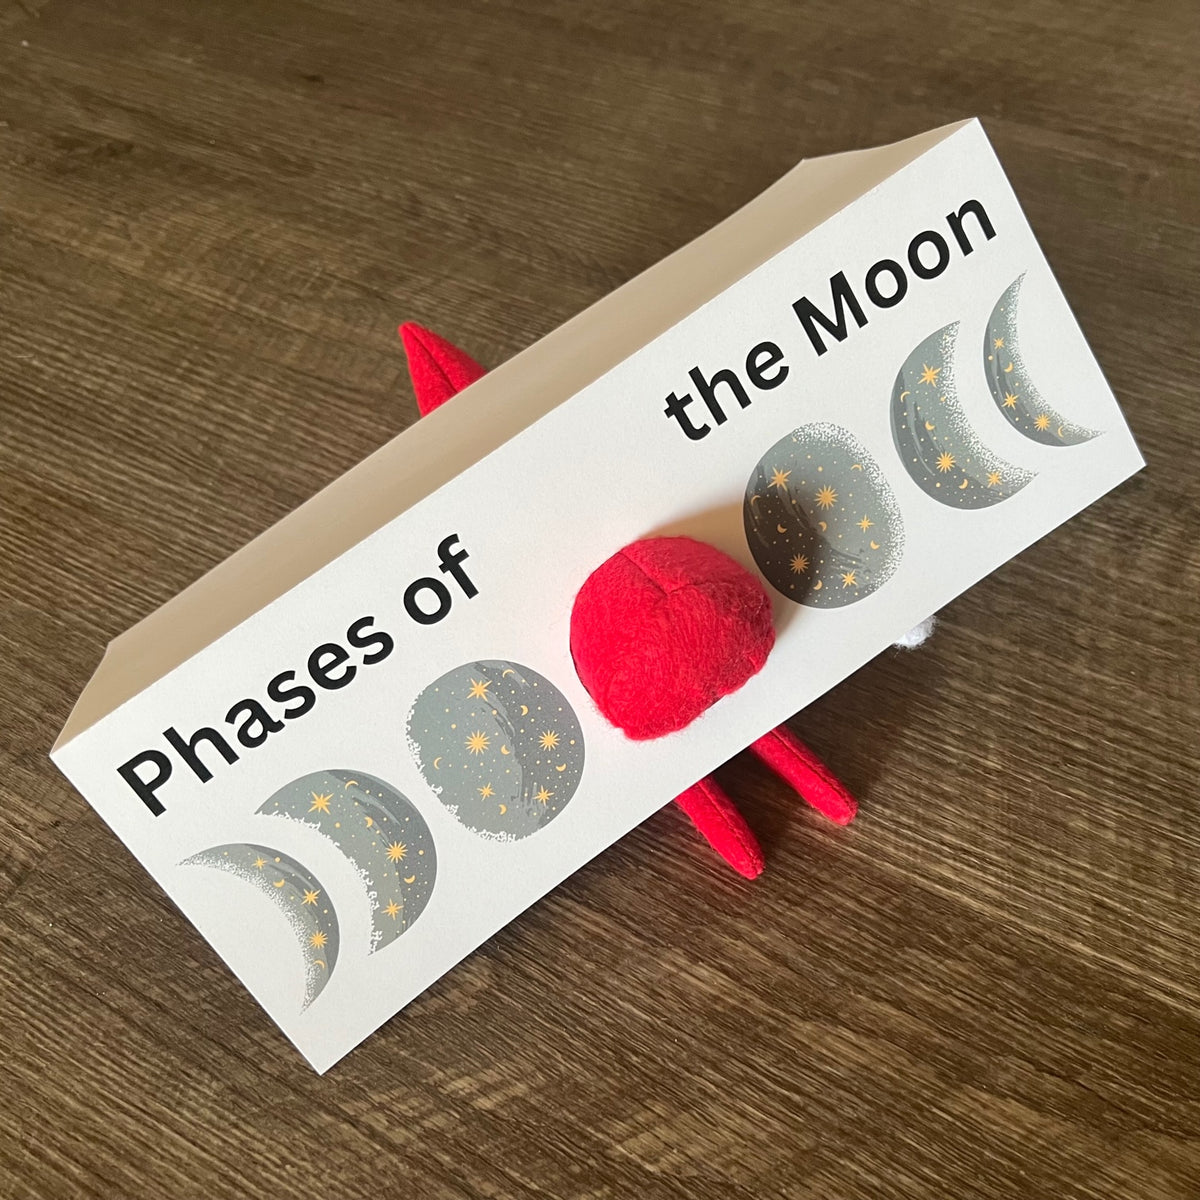 Printable Moon Phase Craft/Activity